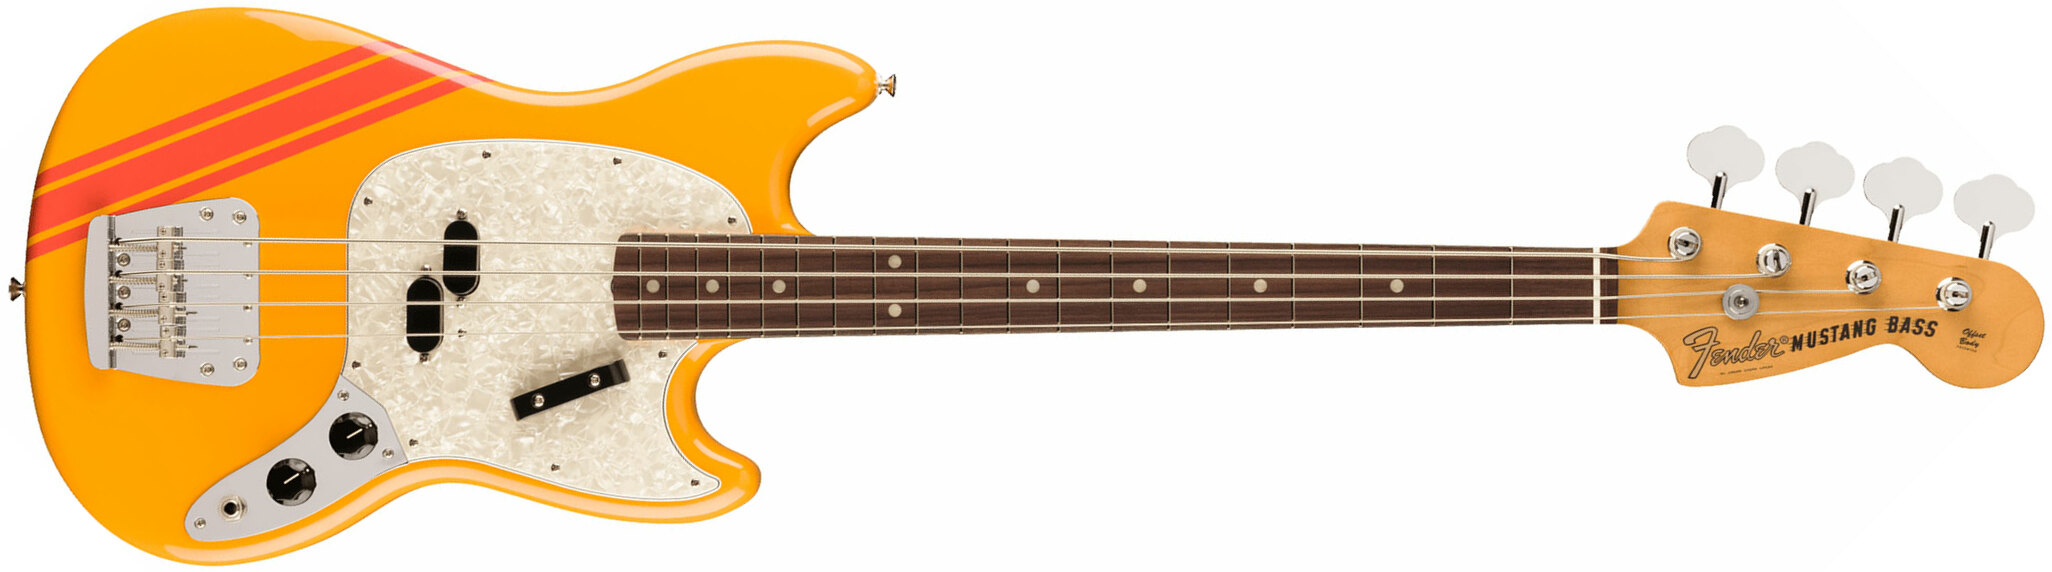 Fender Mustang Bass 70s Competition Vintera 2 Rw - Competition Orange - Solid body electric bass - Main picture